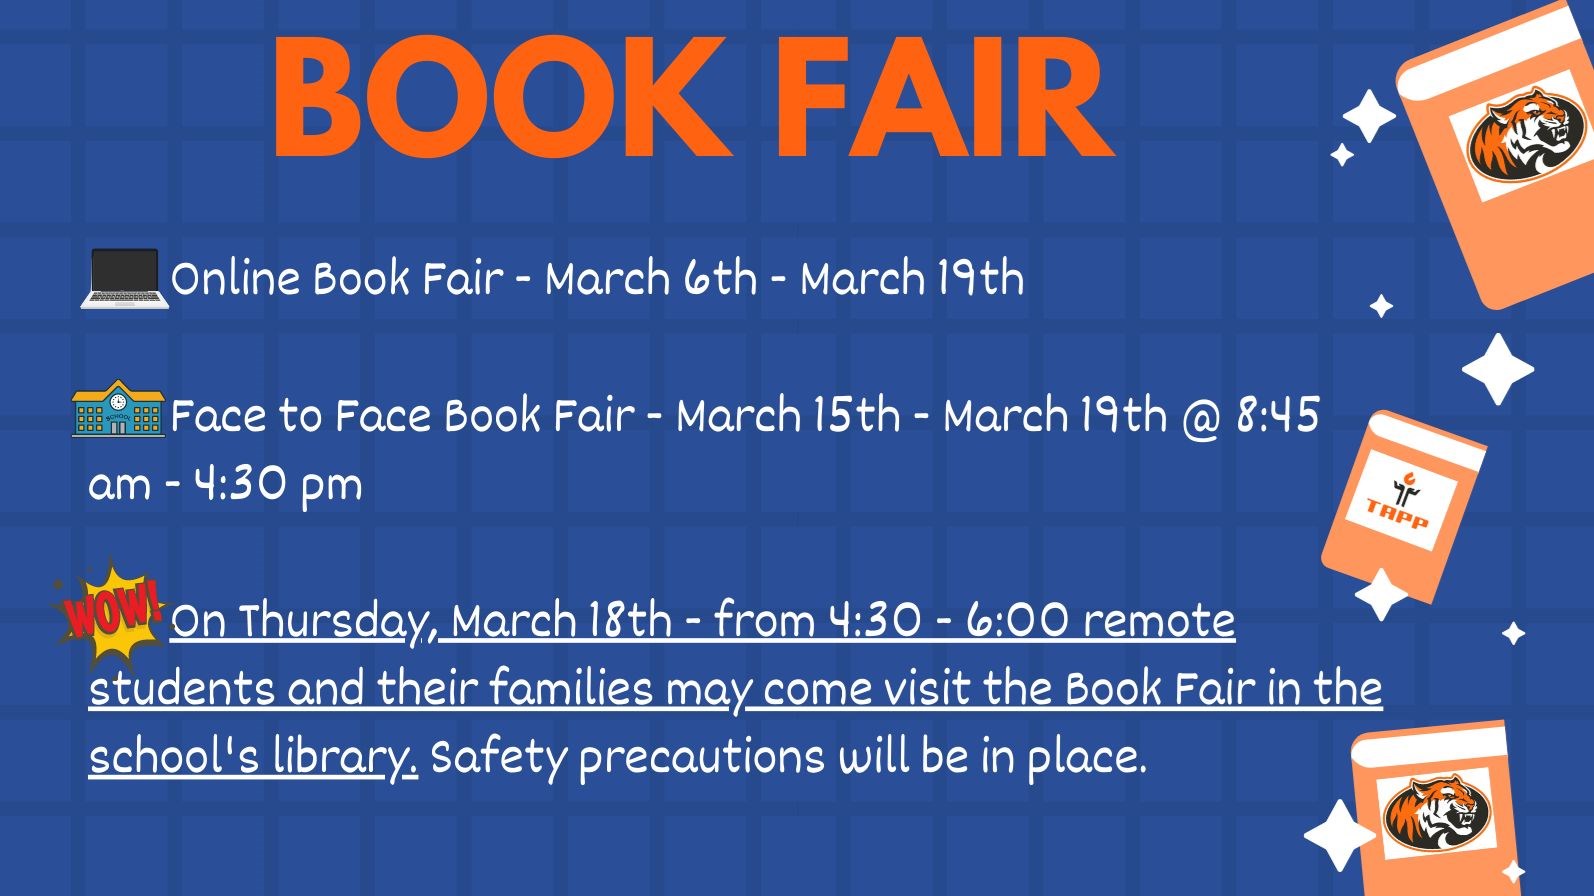 The Book Fair is Coming!!!